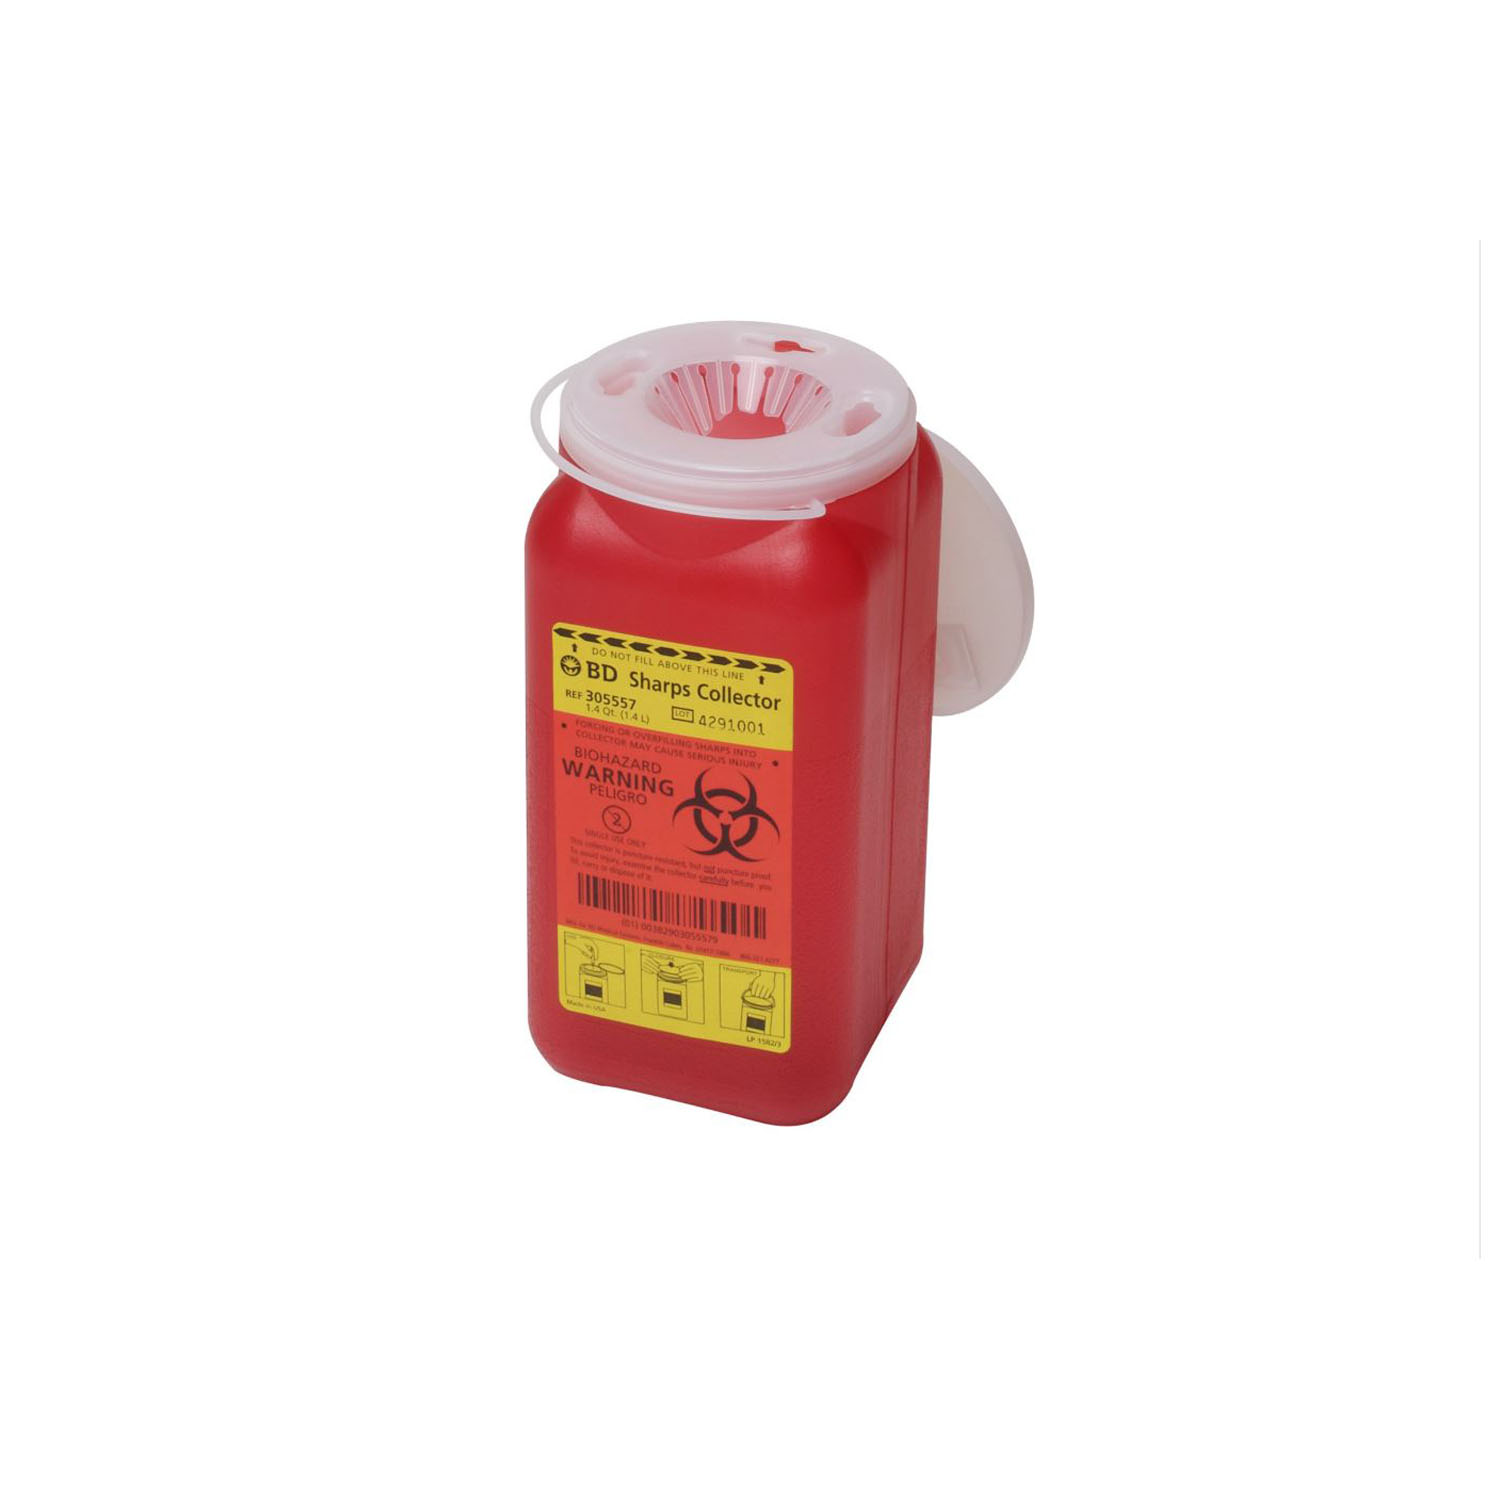 BD MULTI-USE ONE-PIECE SHARPS COLLECTORS : 305557 EA $5.86 Stocked